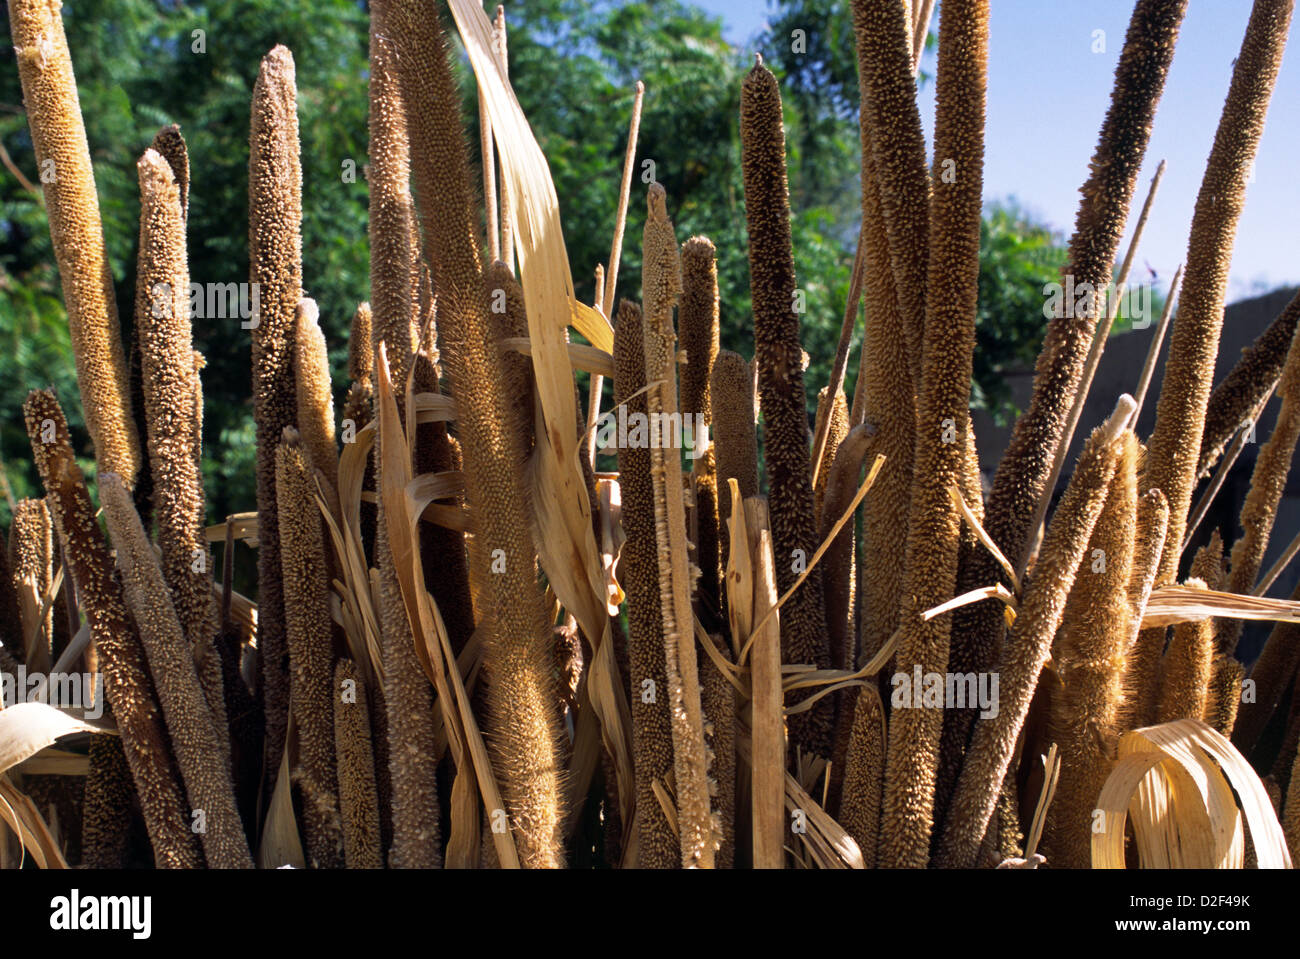 Millet drying in the sun in Mali, West Africa. Stock Photo